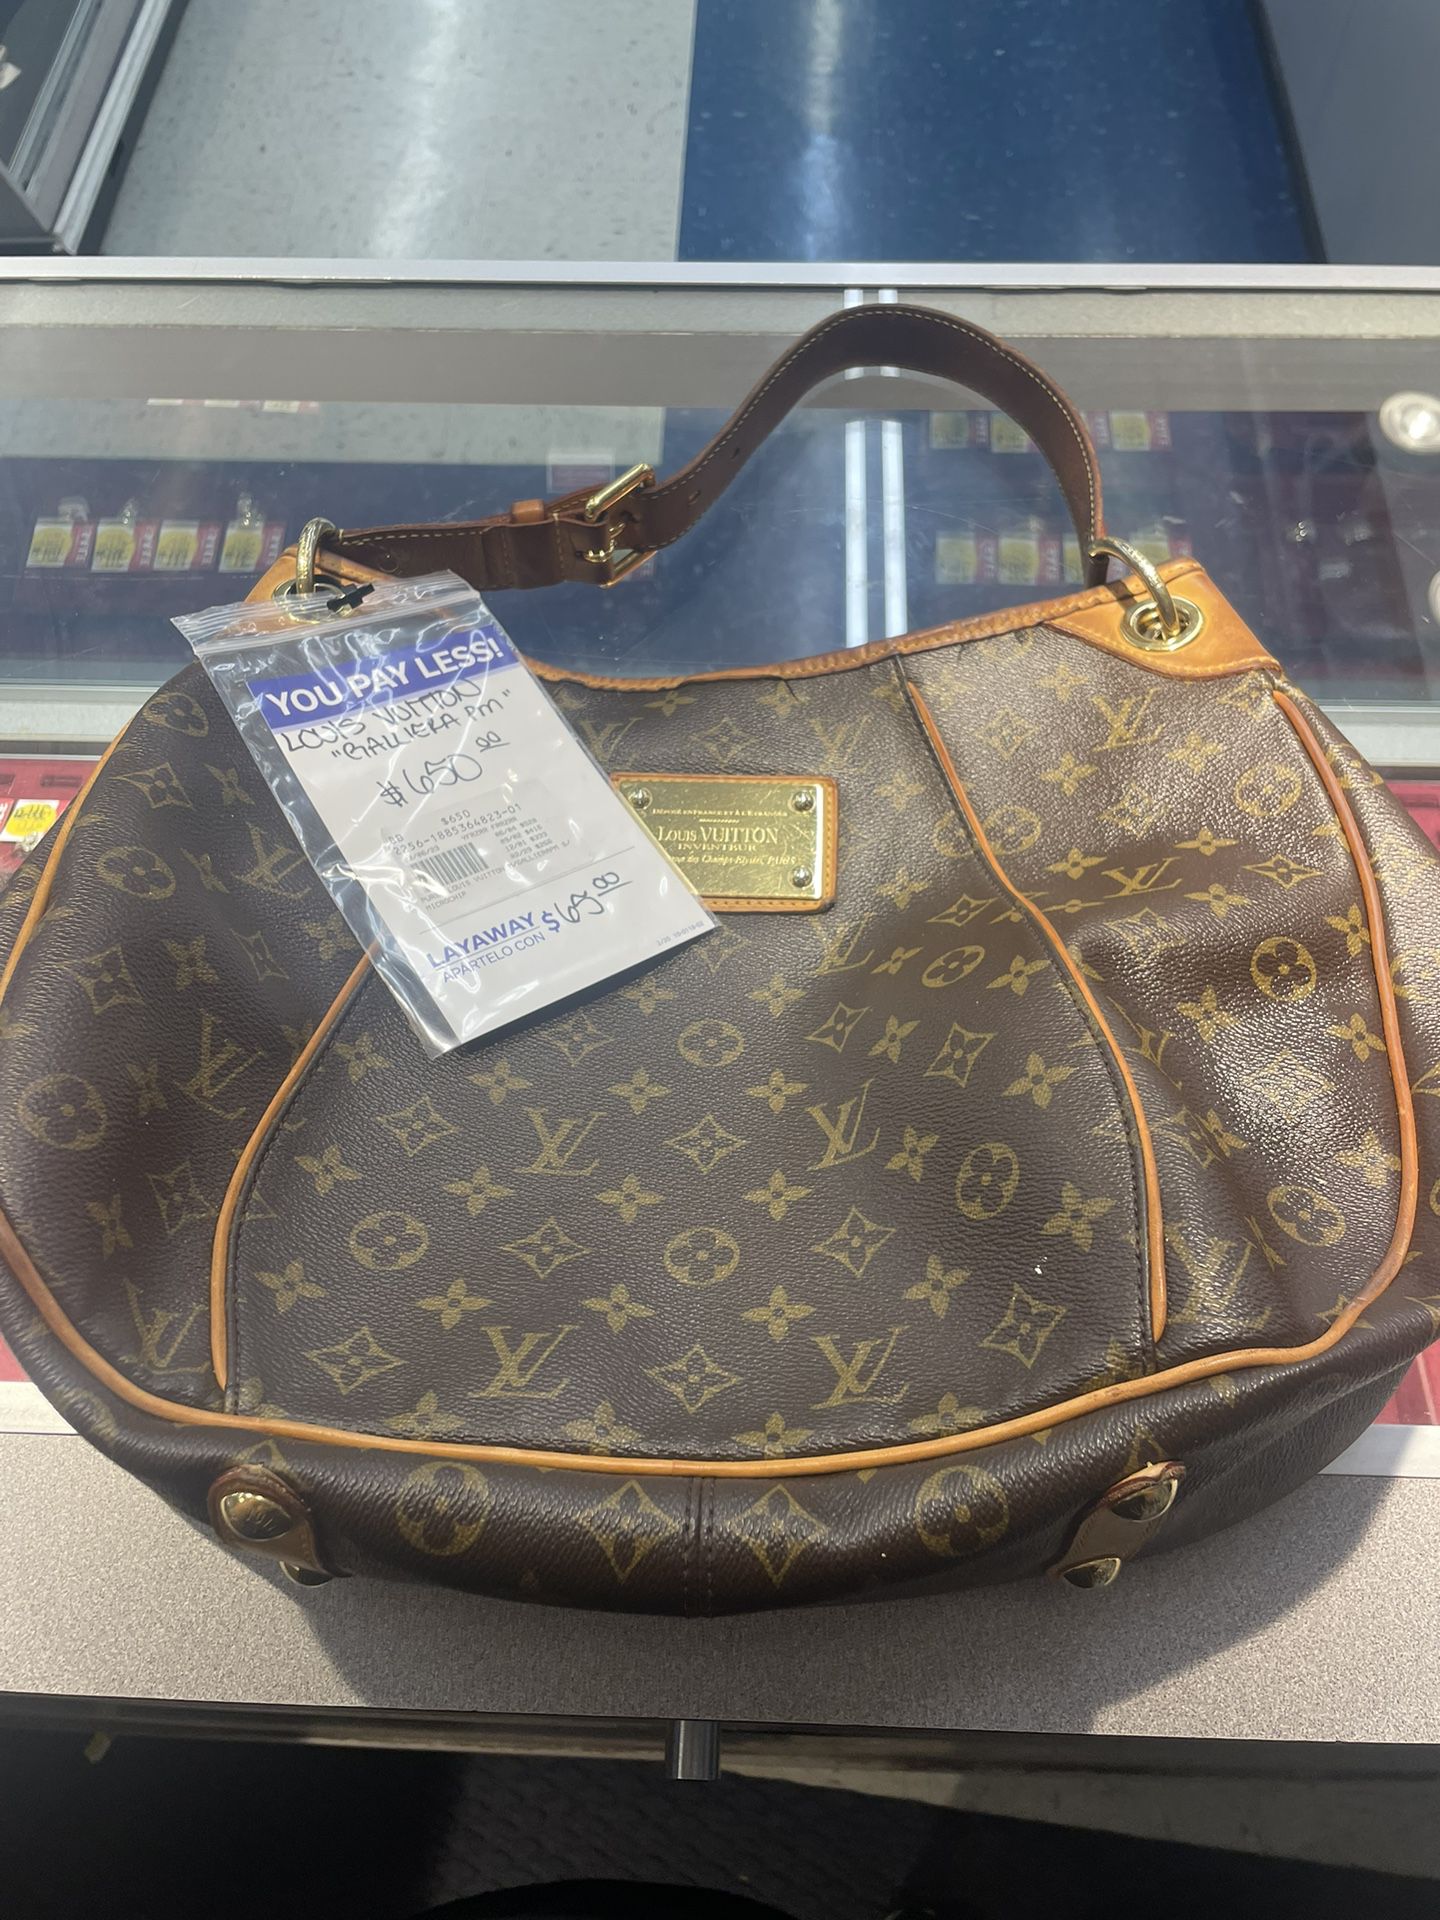 Louis Vuitton Purse for Sale in Humble, TX - OfferUp